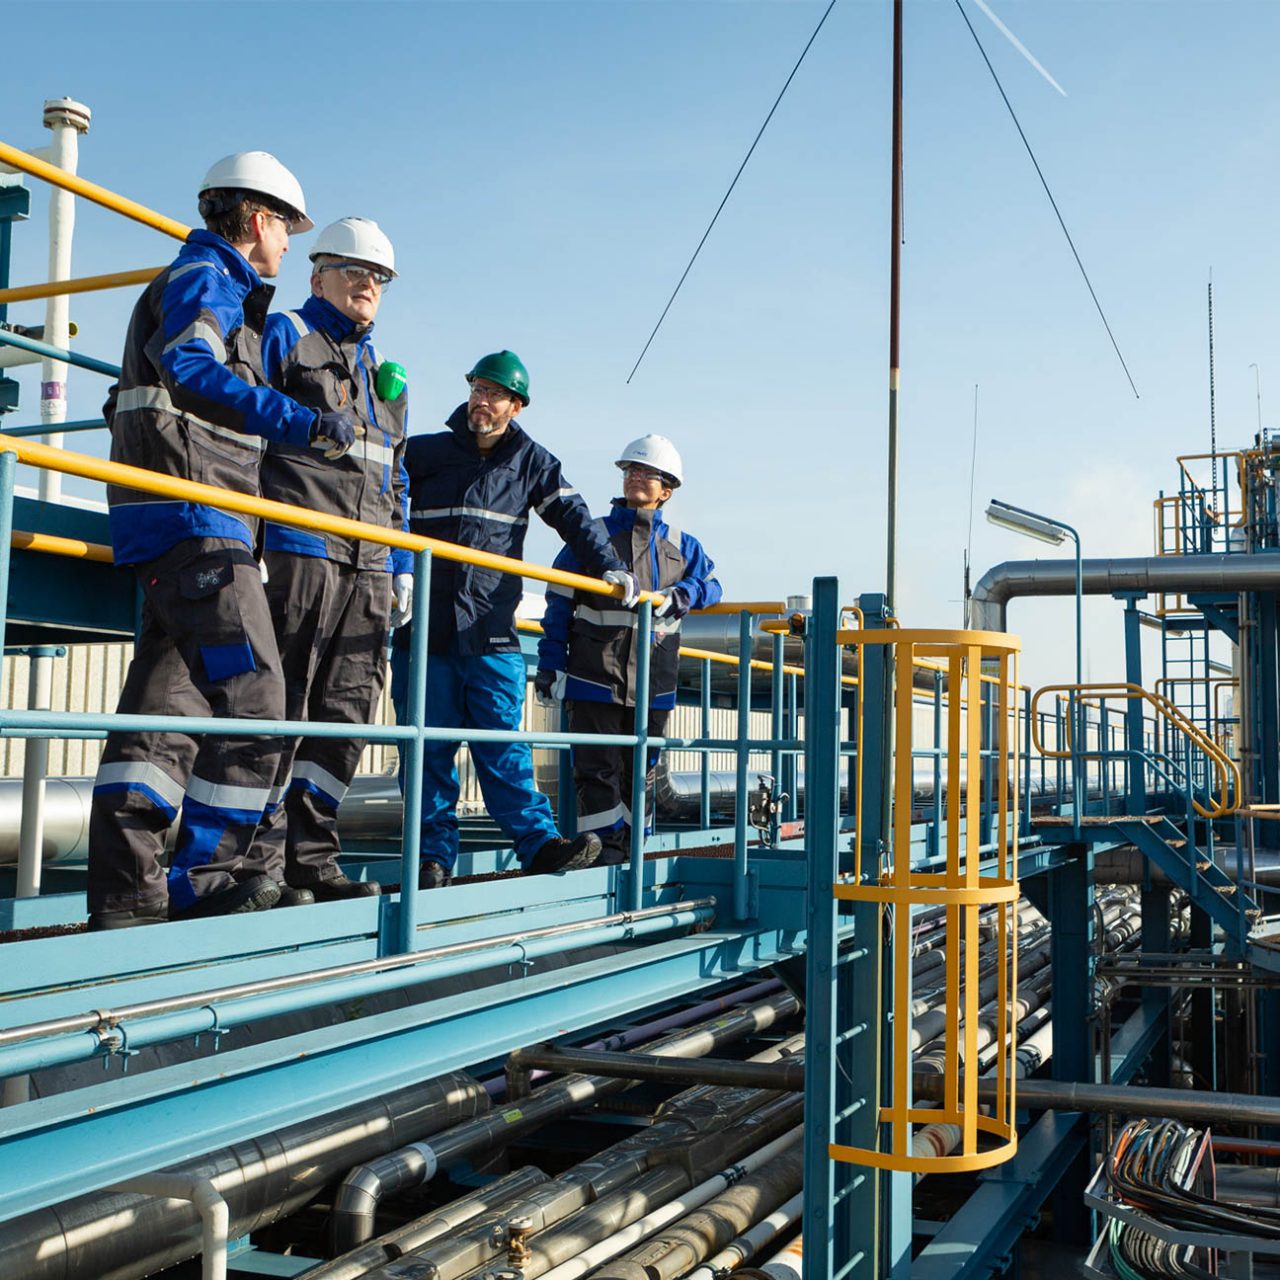 A group of people inspecting a green hydrogen production plant